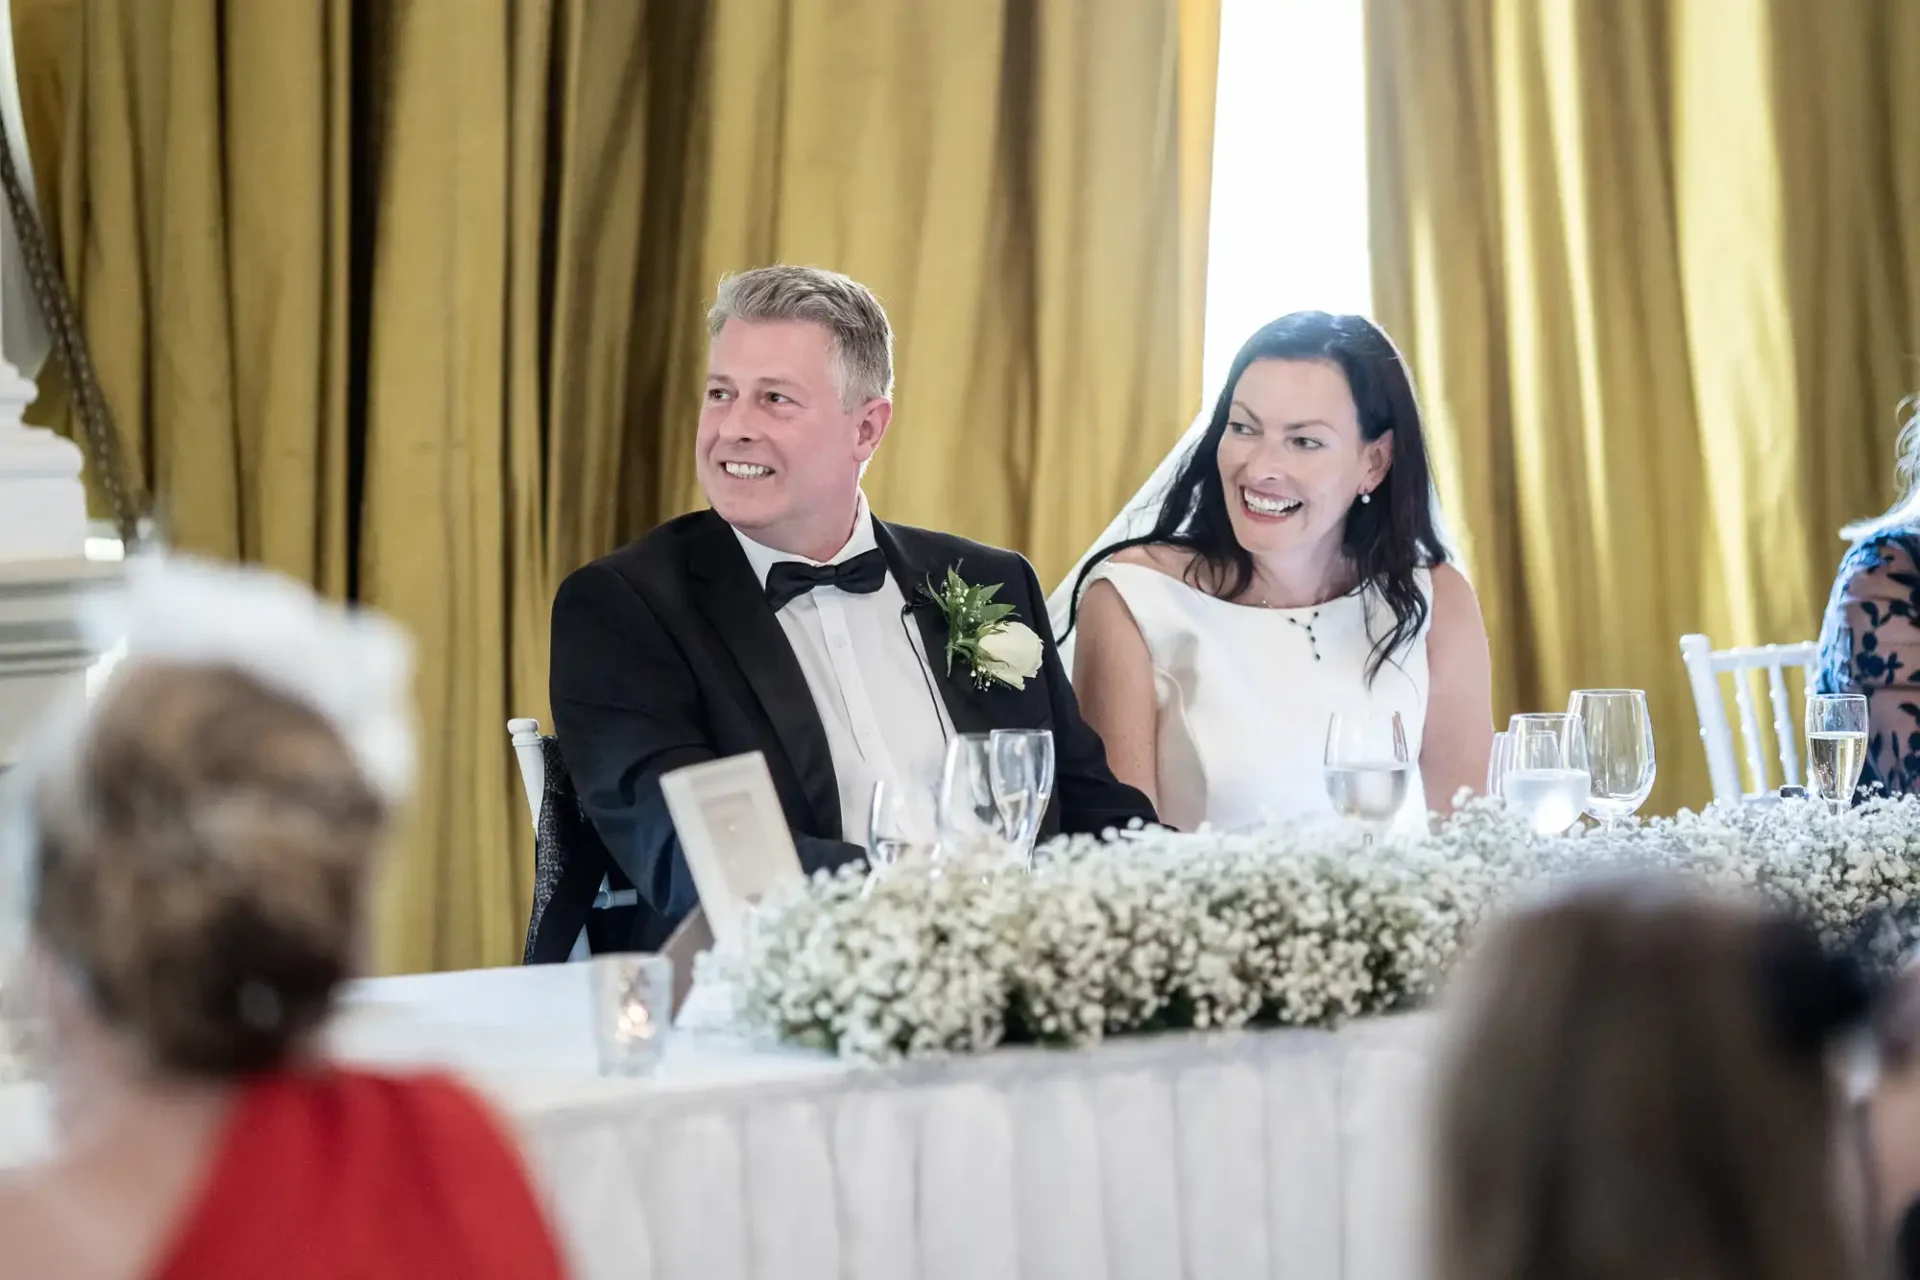 A bride and groom smiling joyfully at a wedding reception table, adorned with white flowers.